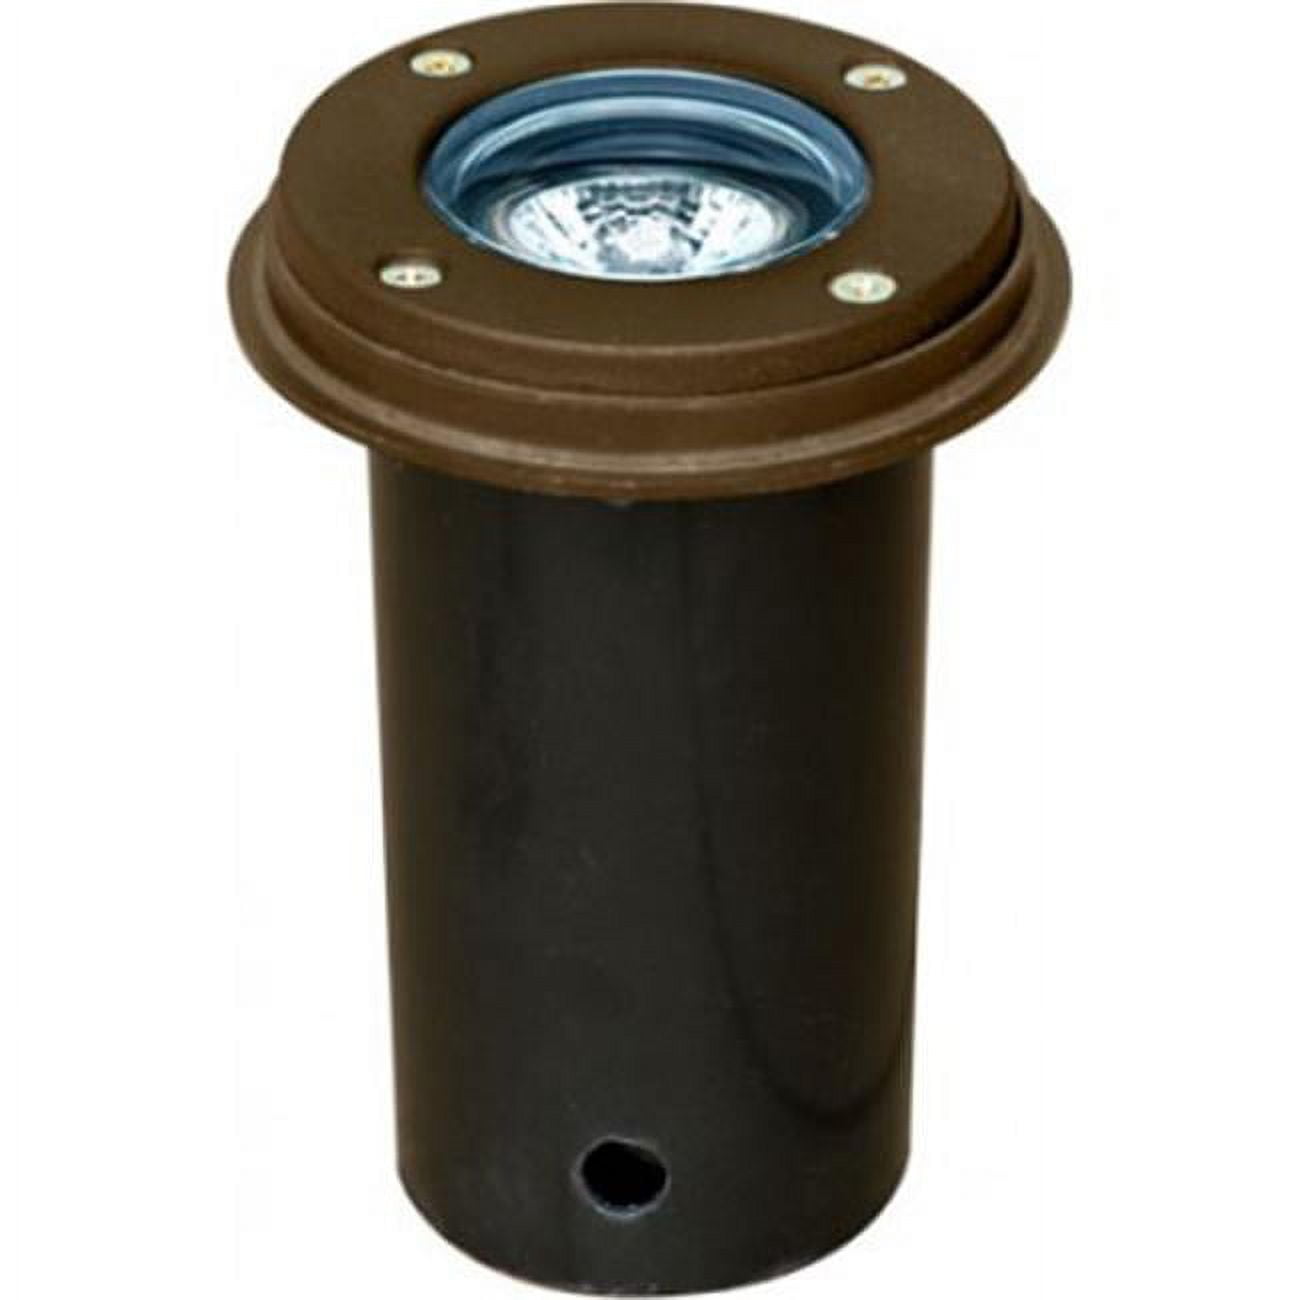 Picture of Dabmar Lighting LV301-BZ-SLV 12V MR16 Well Light without Grill & PVC Sleeve, 20W - Bronze